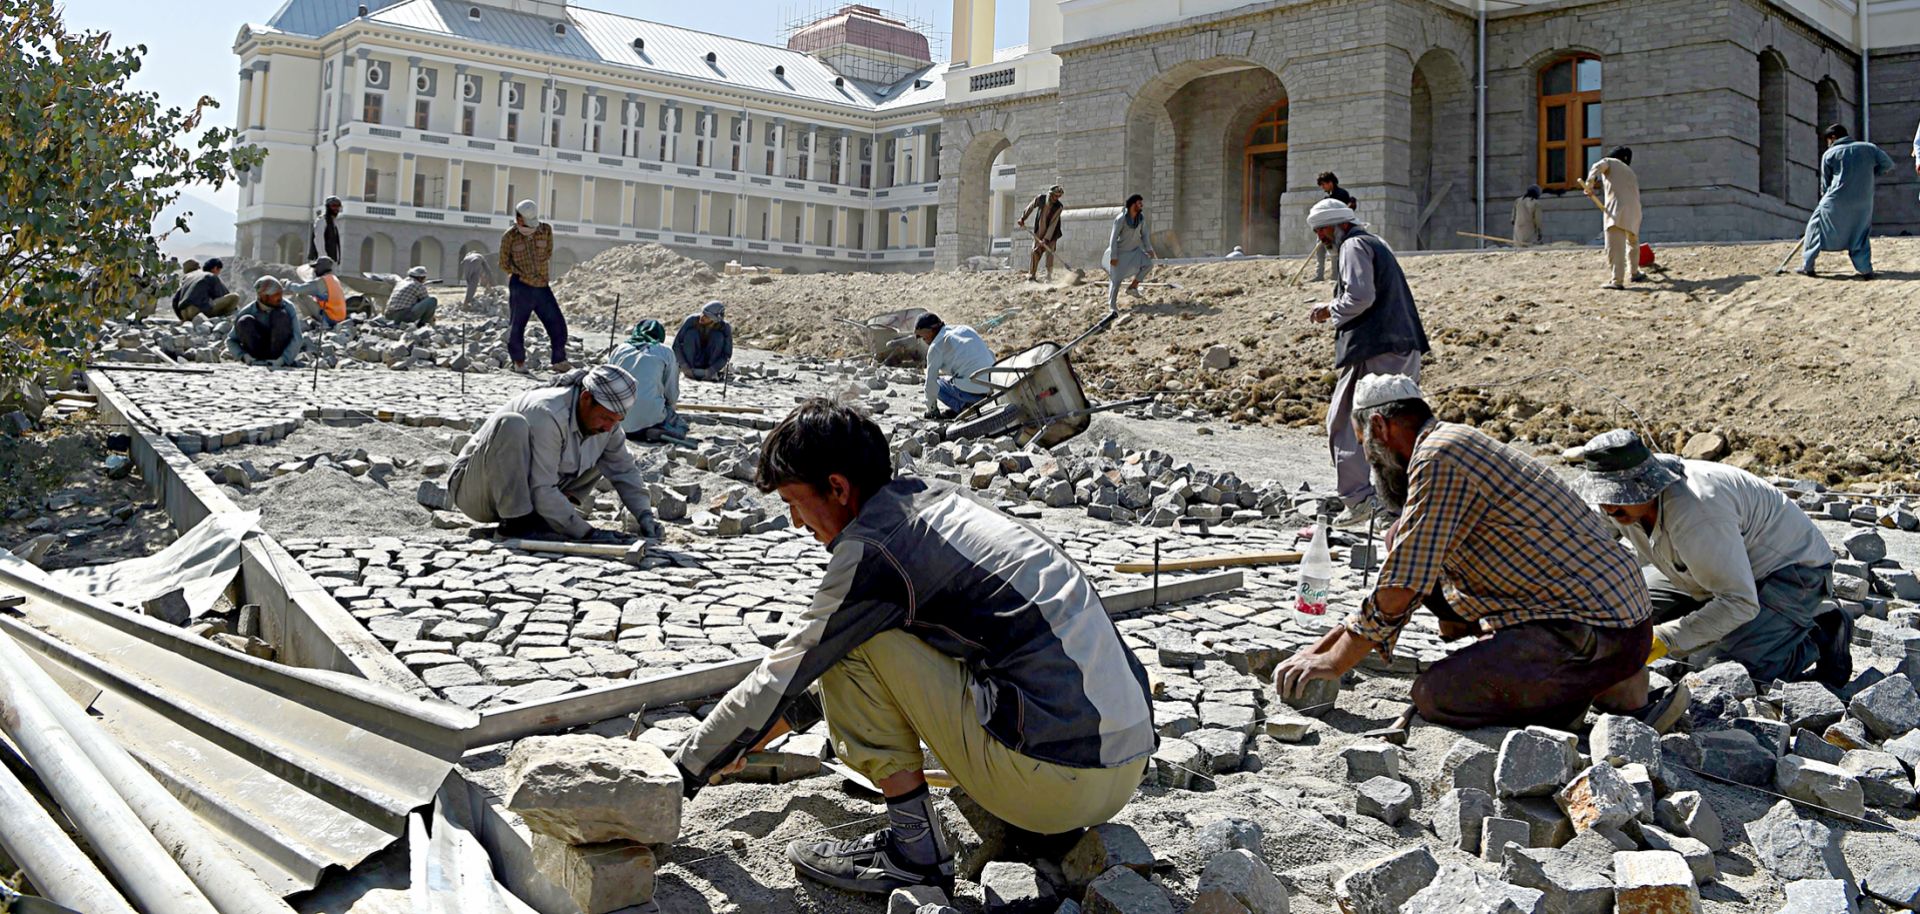 Afghan laborers work on the exterior renovation of Darulaman Palace in Kabul on Aug. 8, 2019.